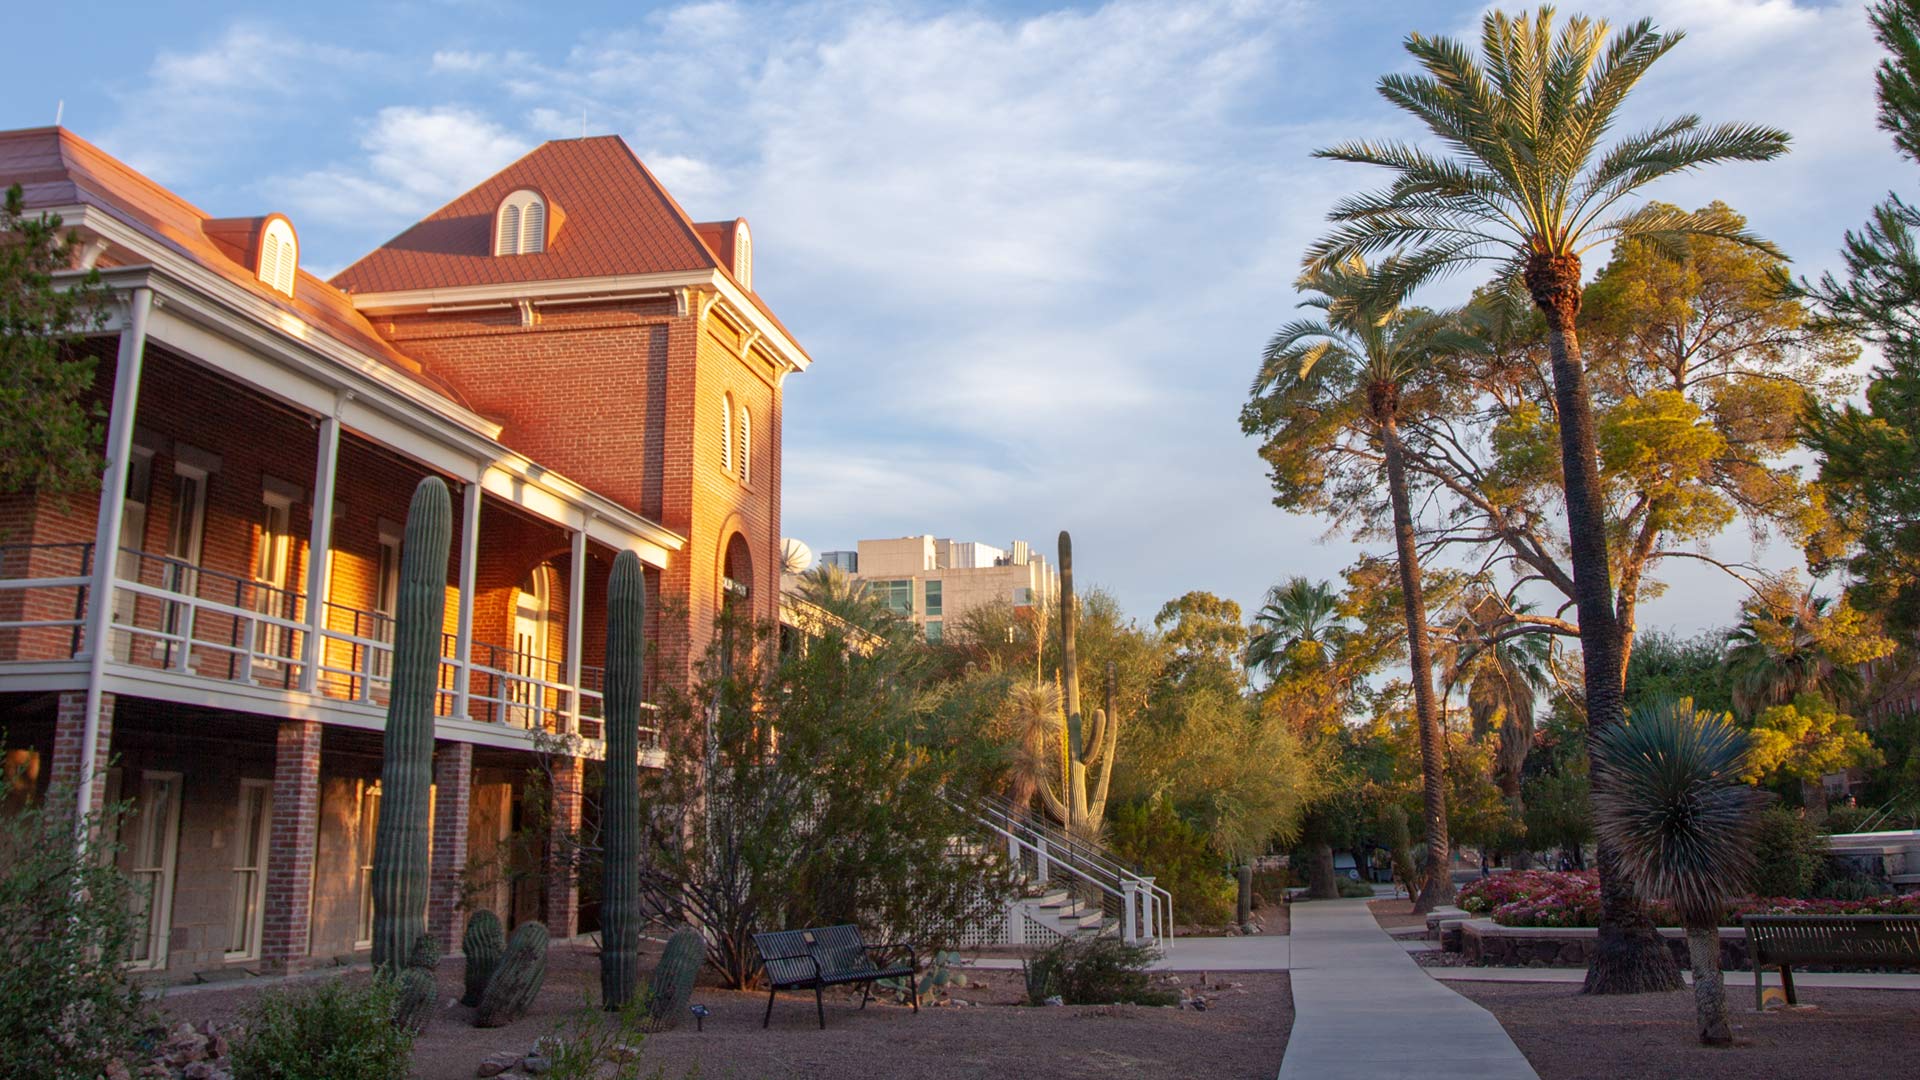 The west facade of Old Main on the campus of the University of Arizona. From August, 2019.